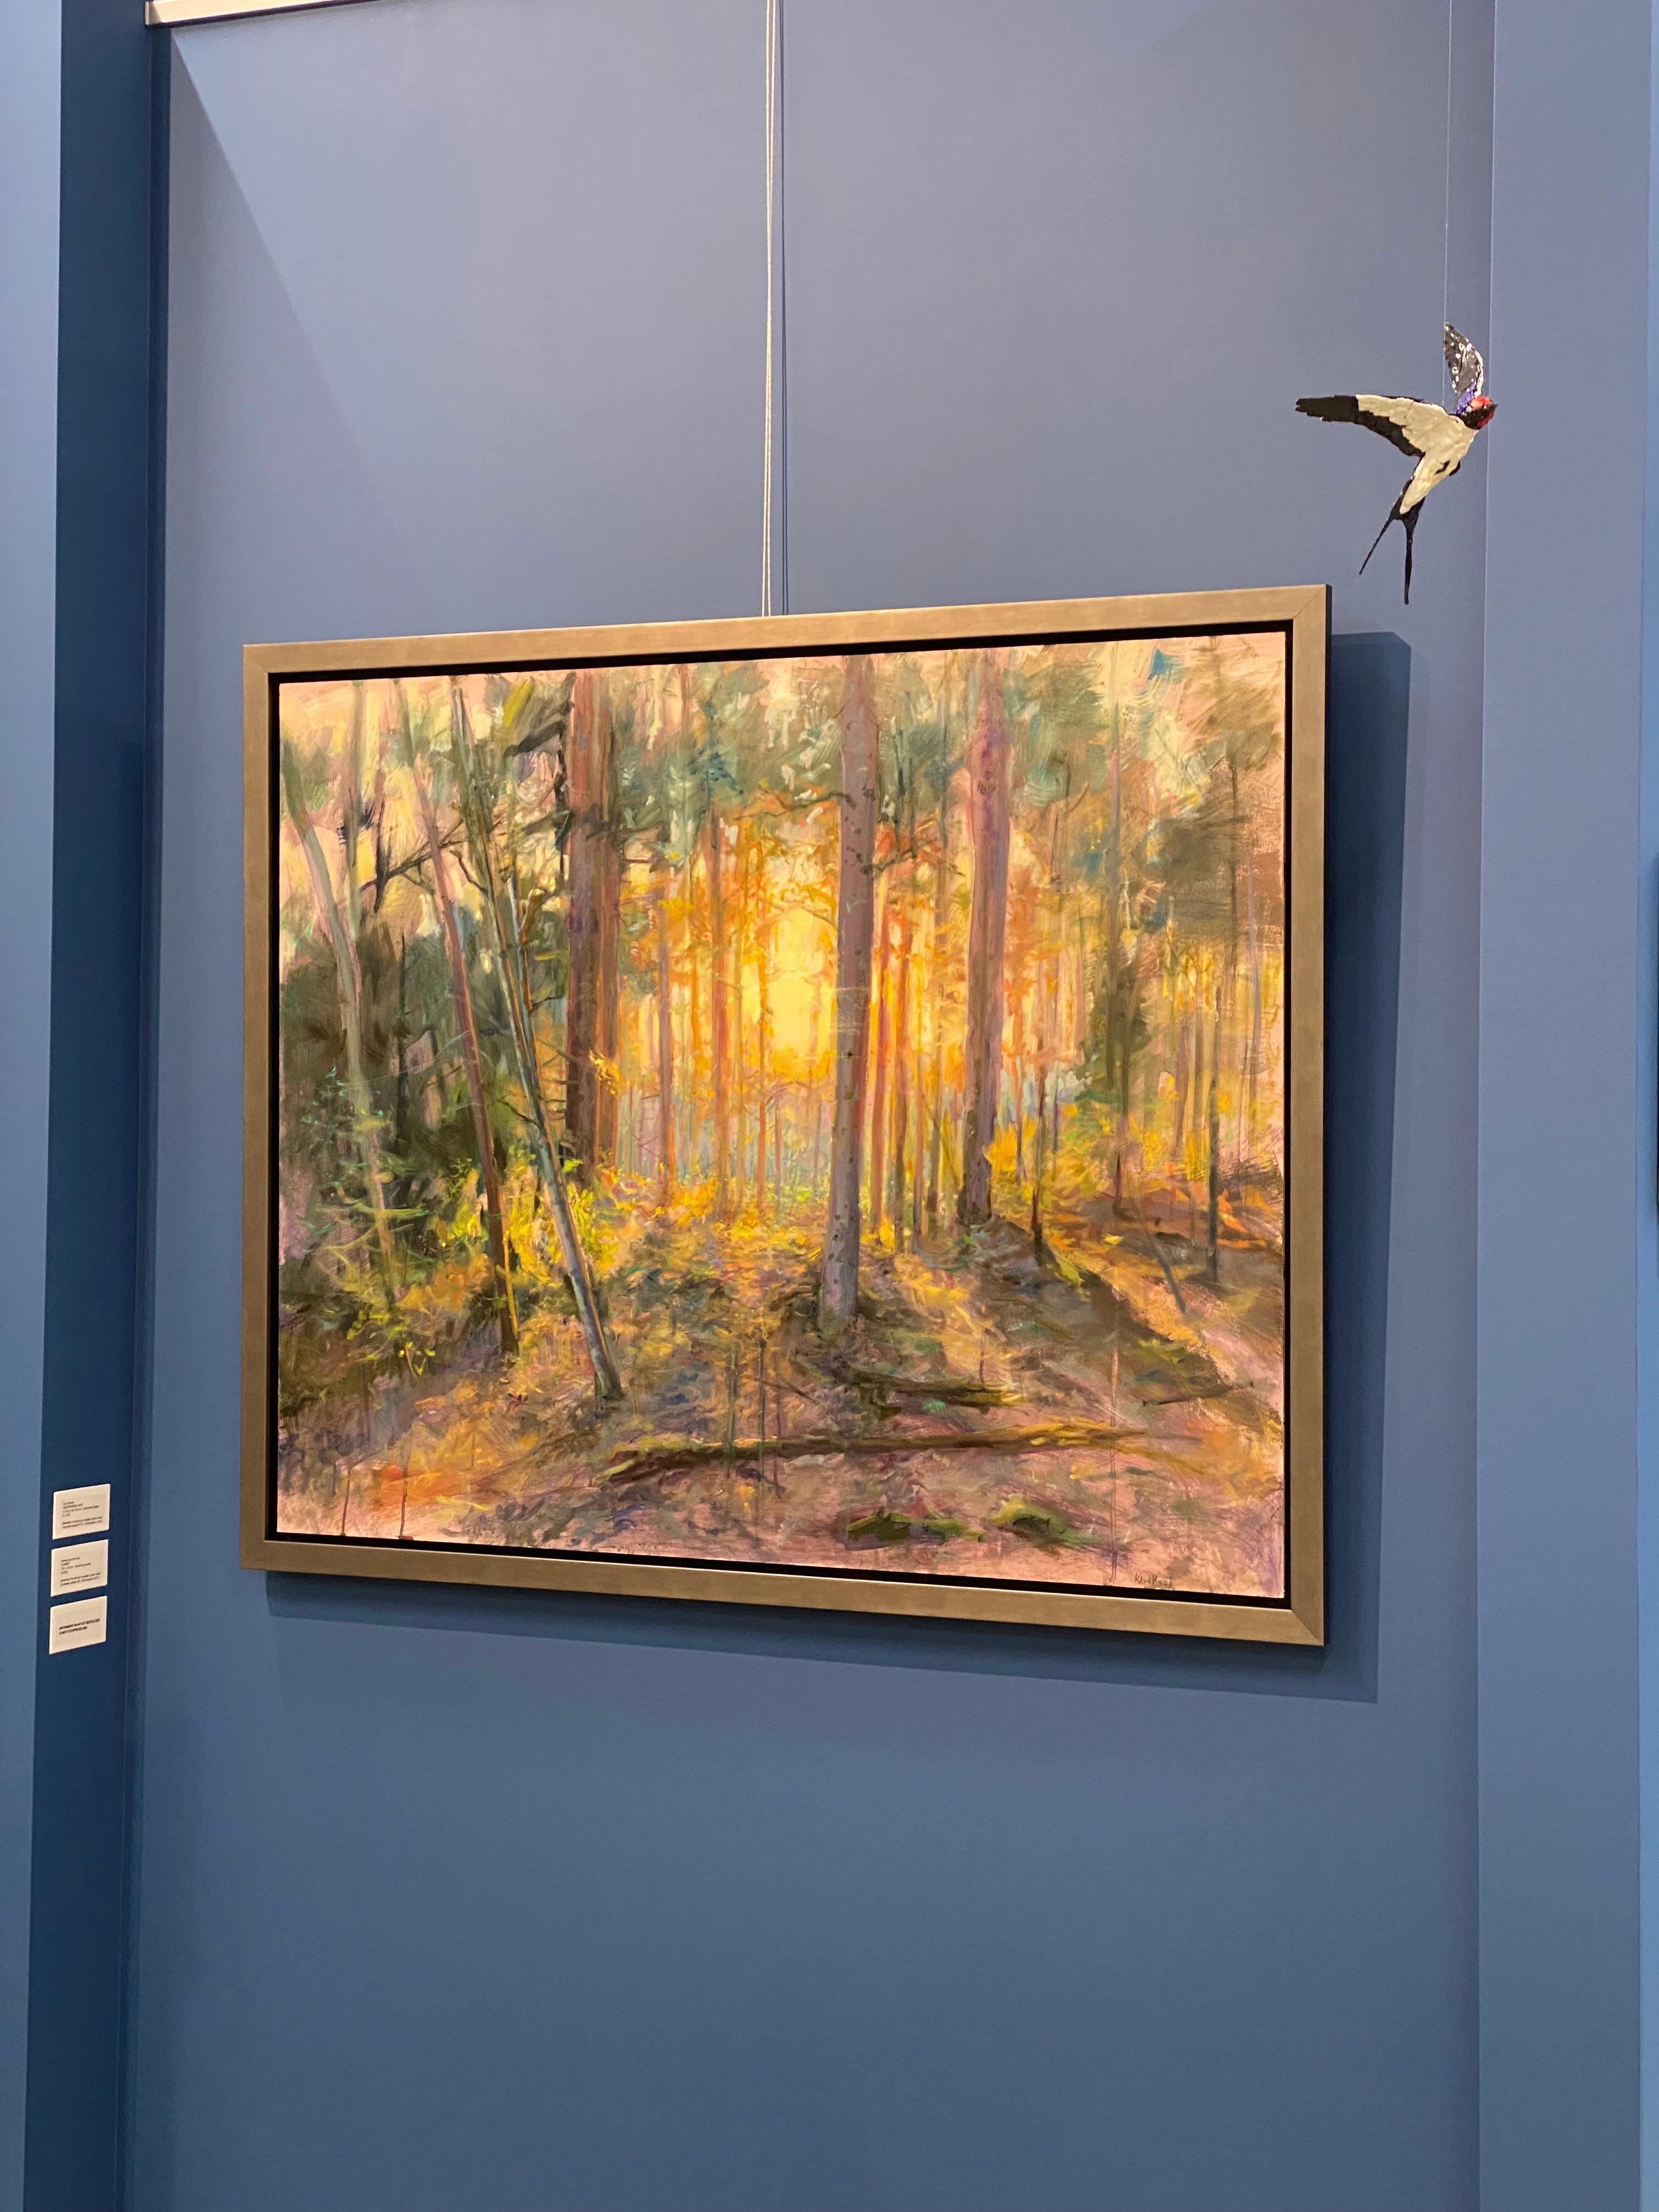 Keimpe van der Kooi
Summer
100 x 122 cm
framed: 110-132 cm ( This frame is included)
Oil on wood panel 

This Painting is made by Dutch Artist Keimpe van der Kooi. He likes to paint still-lifes in colorful ambiance. In his still-life paintings there